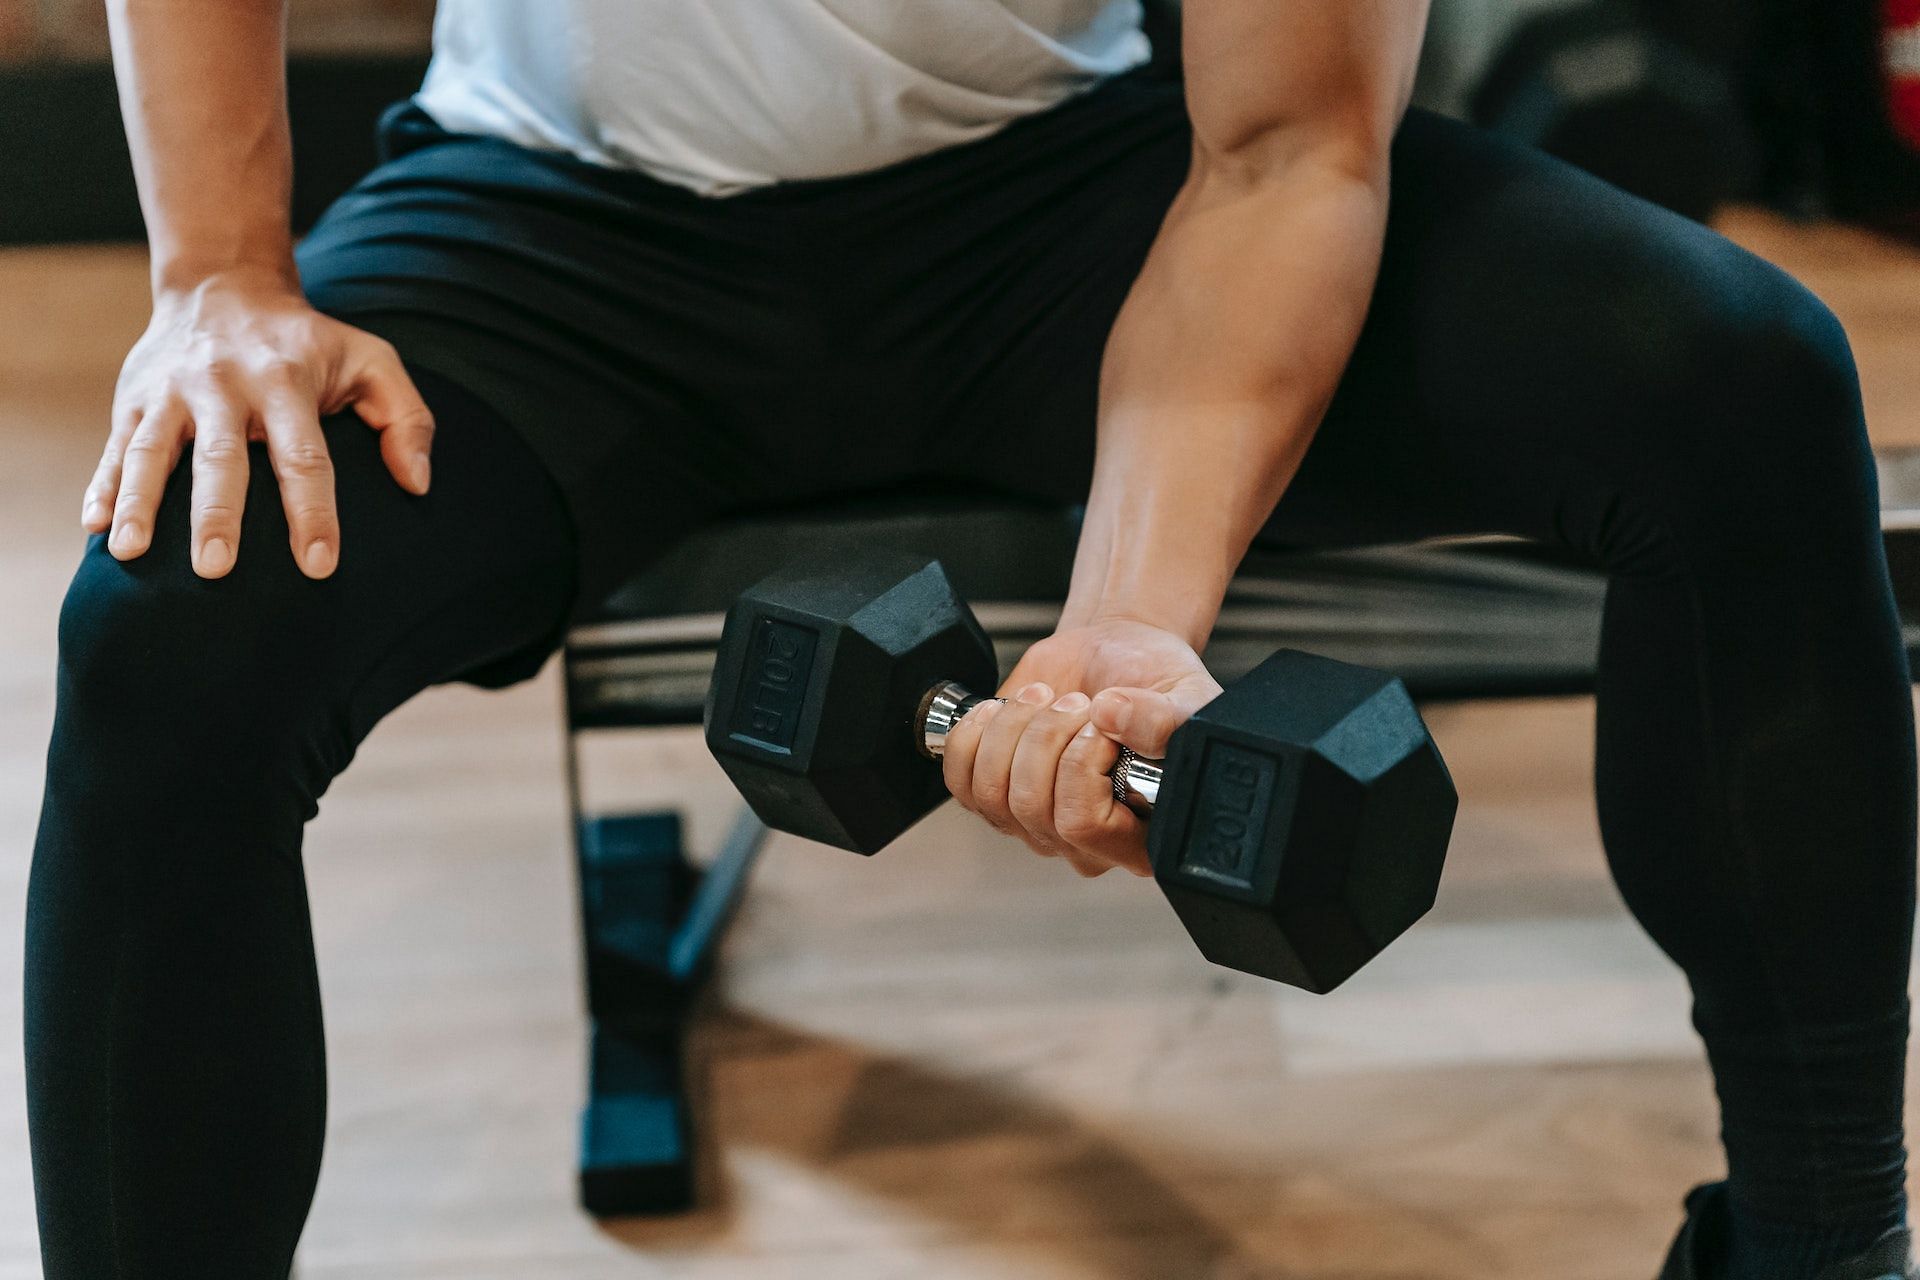 Arm-strengthening exercises improves muscle tone. (Photo via Pexels/Photo by Andres  Ayrton)